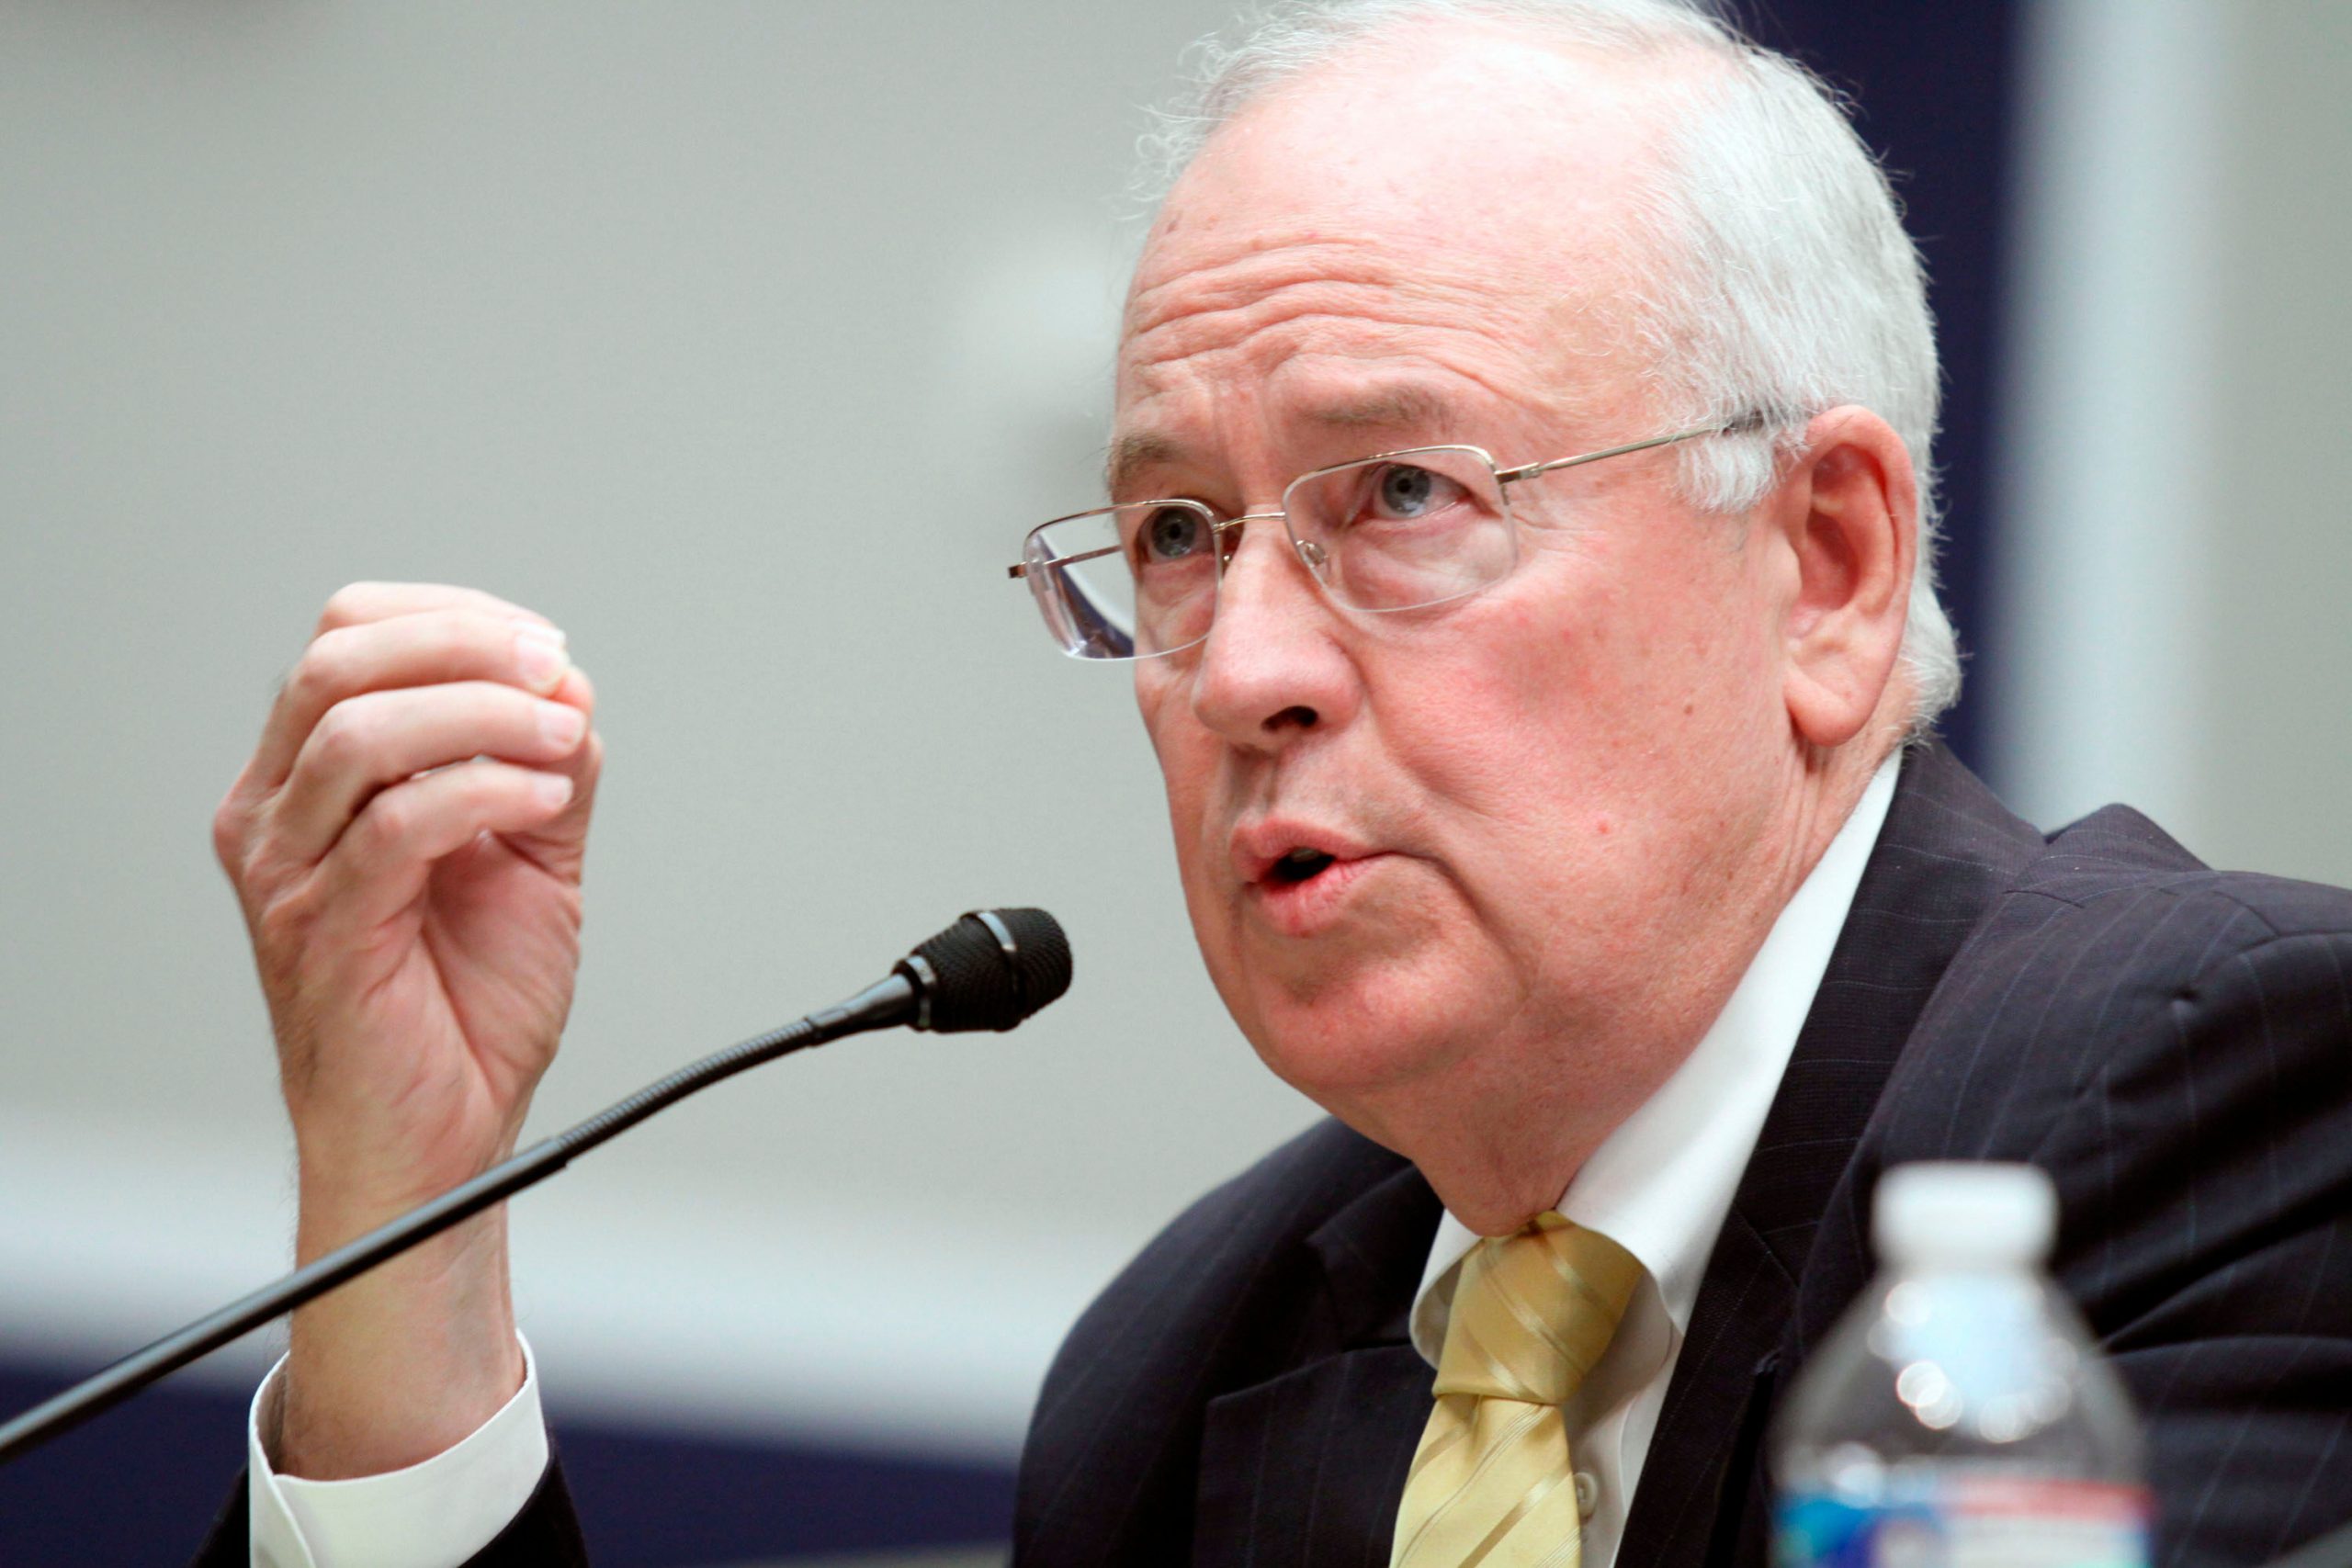 Ken Starr, prominent attorney whose probe led to Bill Clinton impeachment, dies at 76